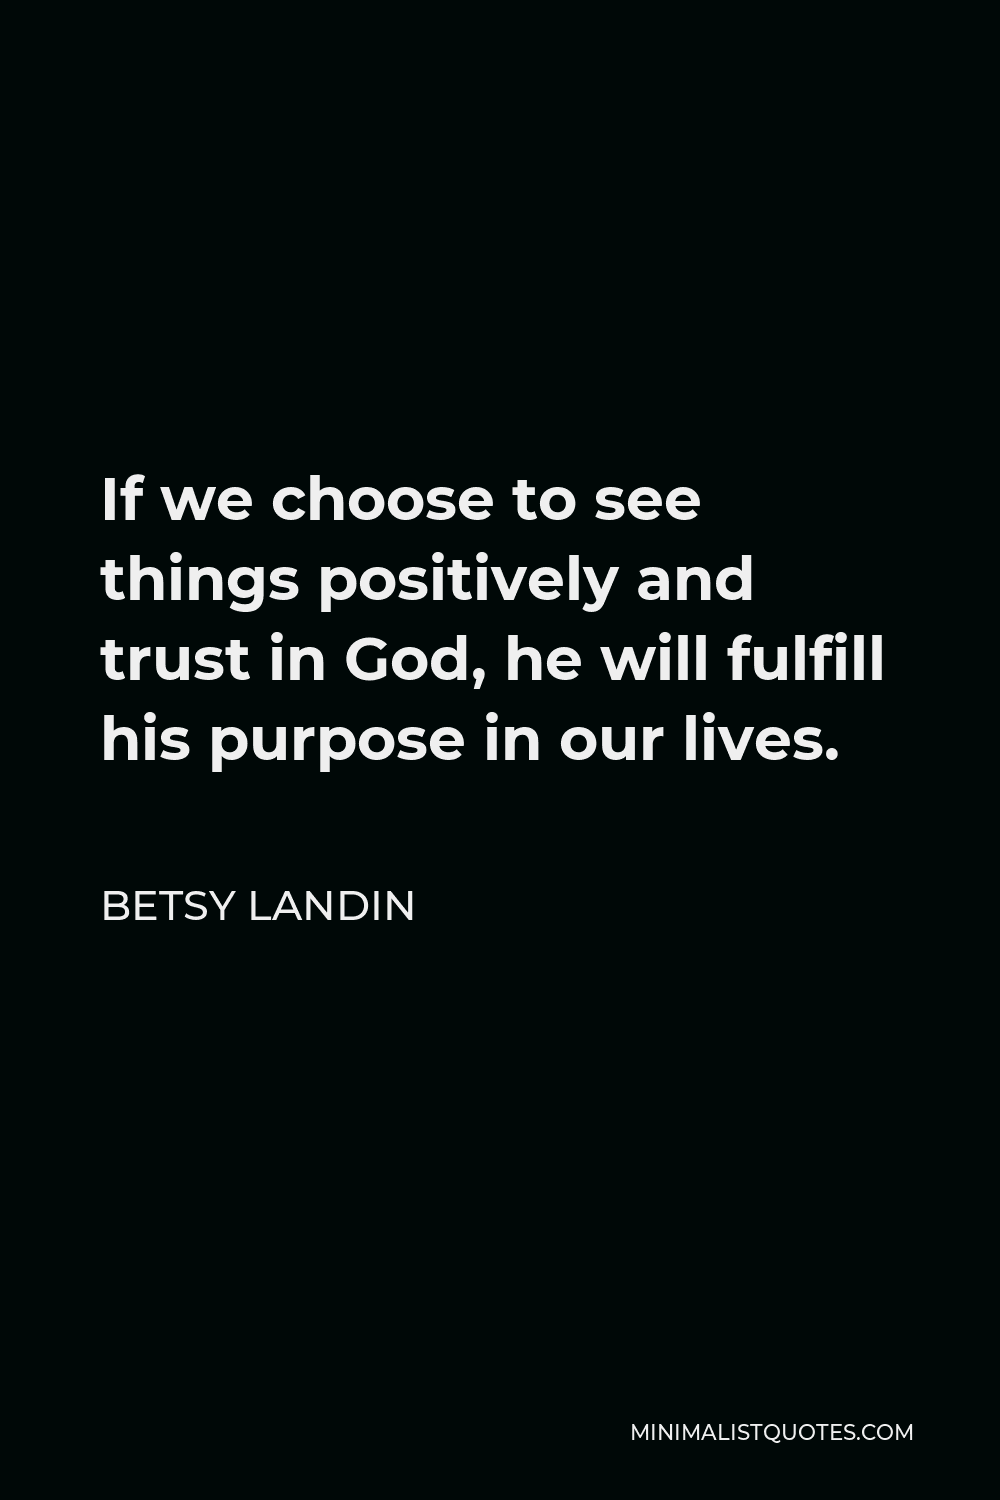 Betsy Landin Quote - If we choose to see things positively and trust in God, he will fulfill his purpose in our lives.